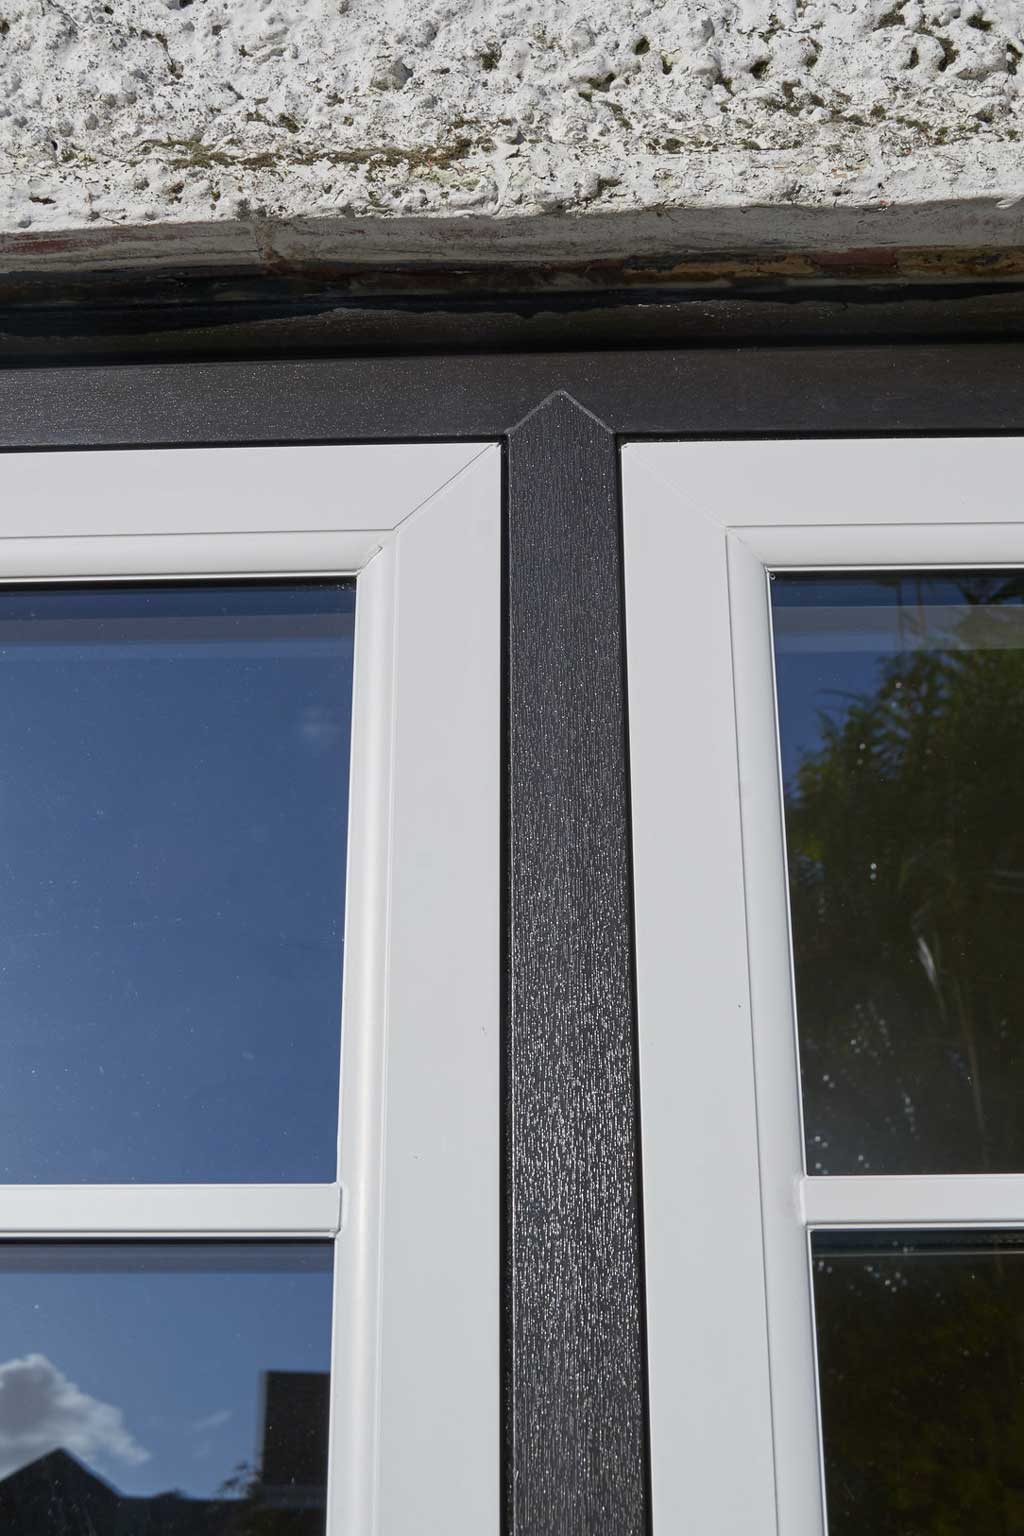 tailored supply only upvc windows reading